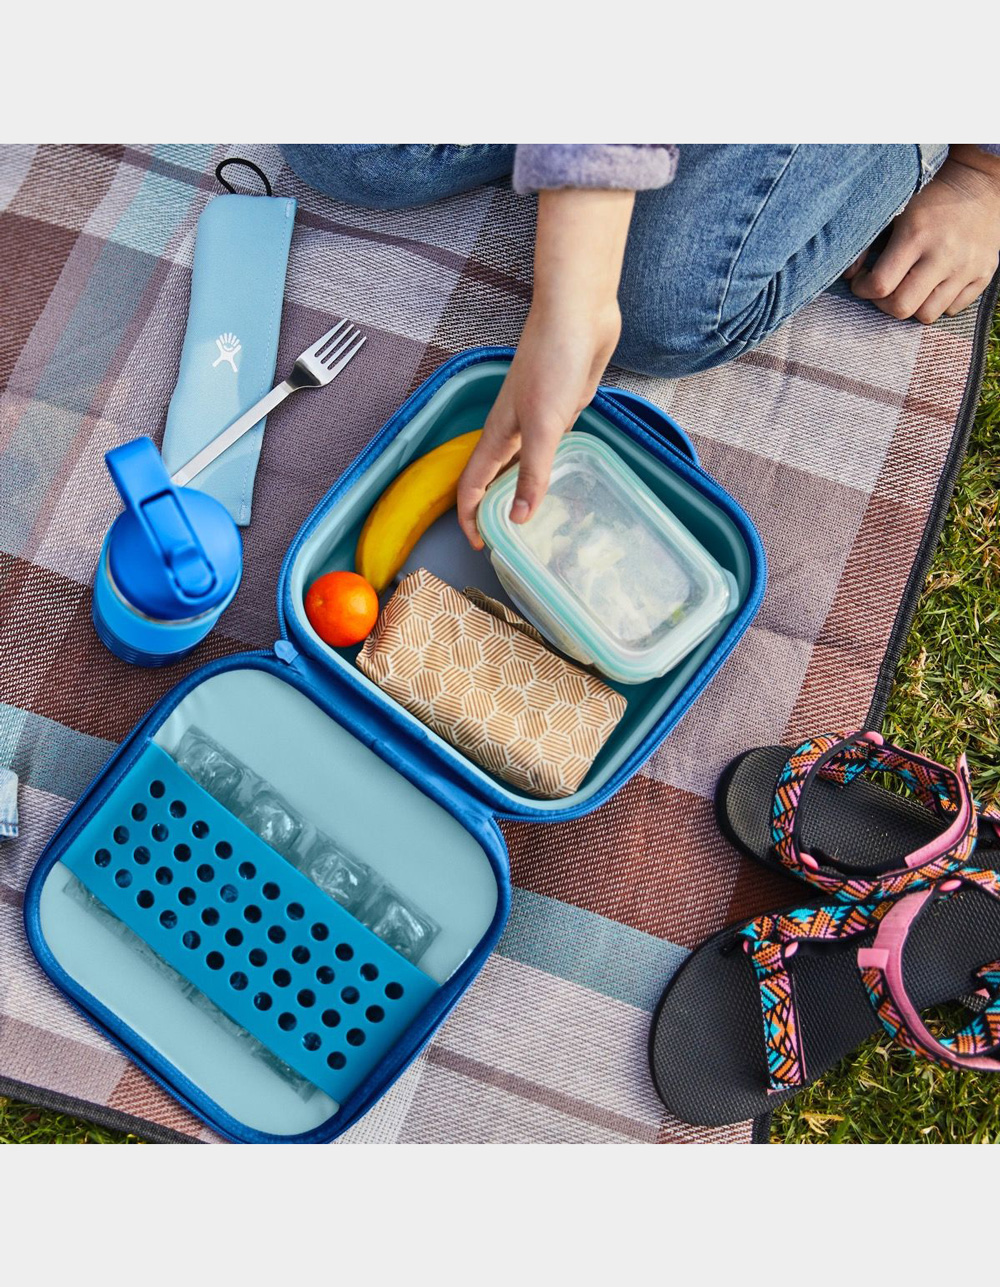 My new Hydroflask lunchbox might be for kids, but it packs a punch